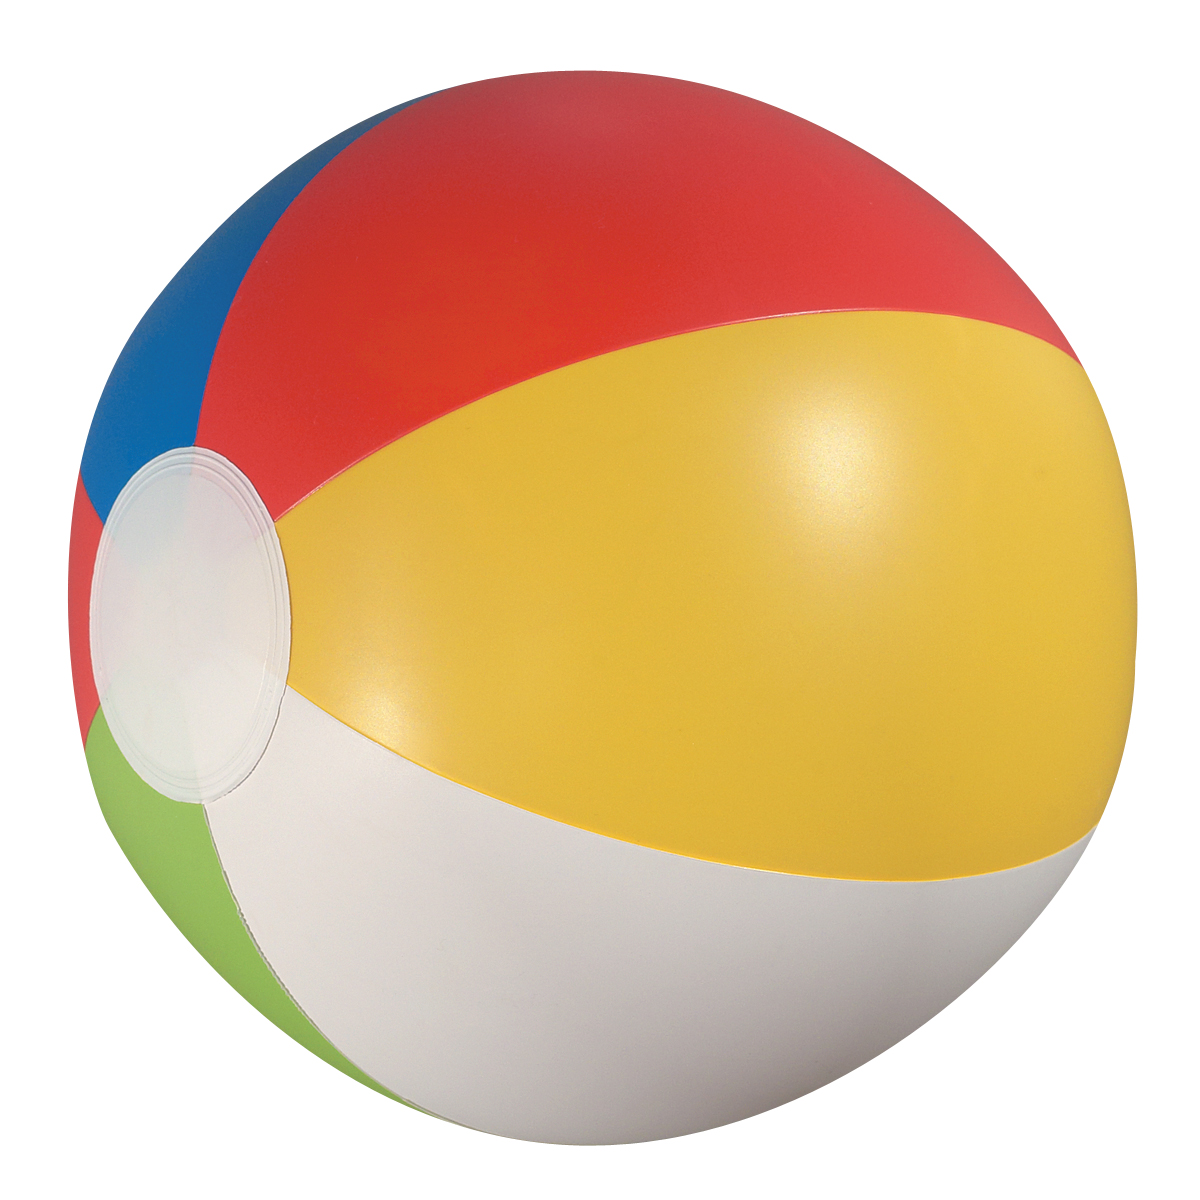 Free download Beachball In Sand Summer Android Wallpaper free download [1080x1920] for your